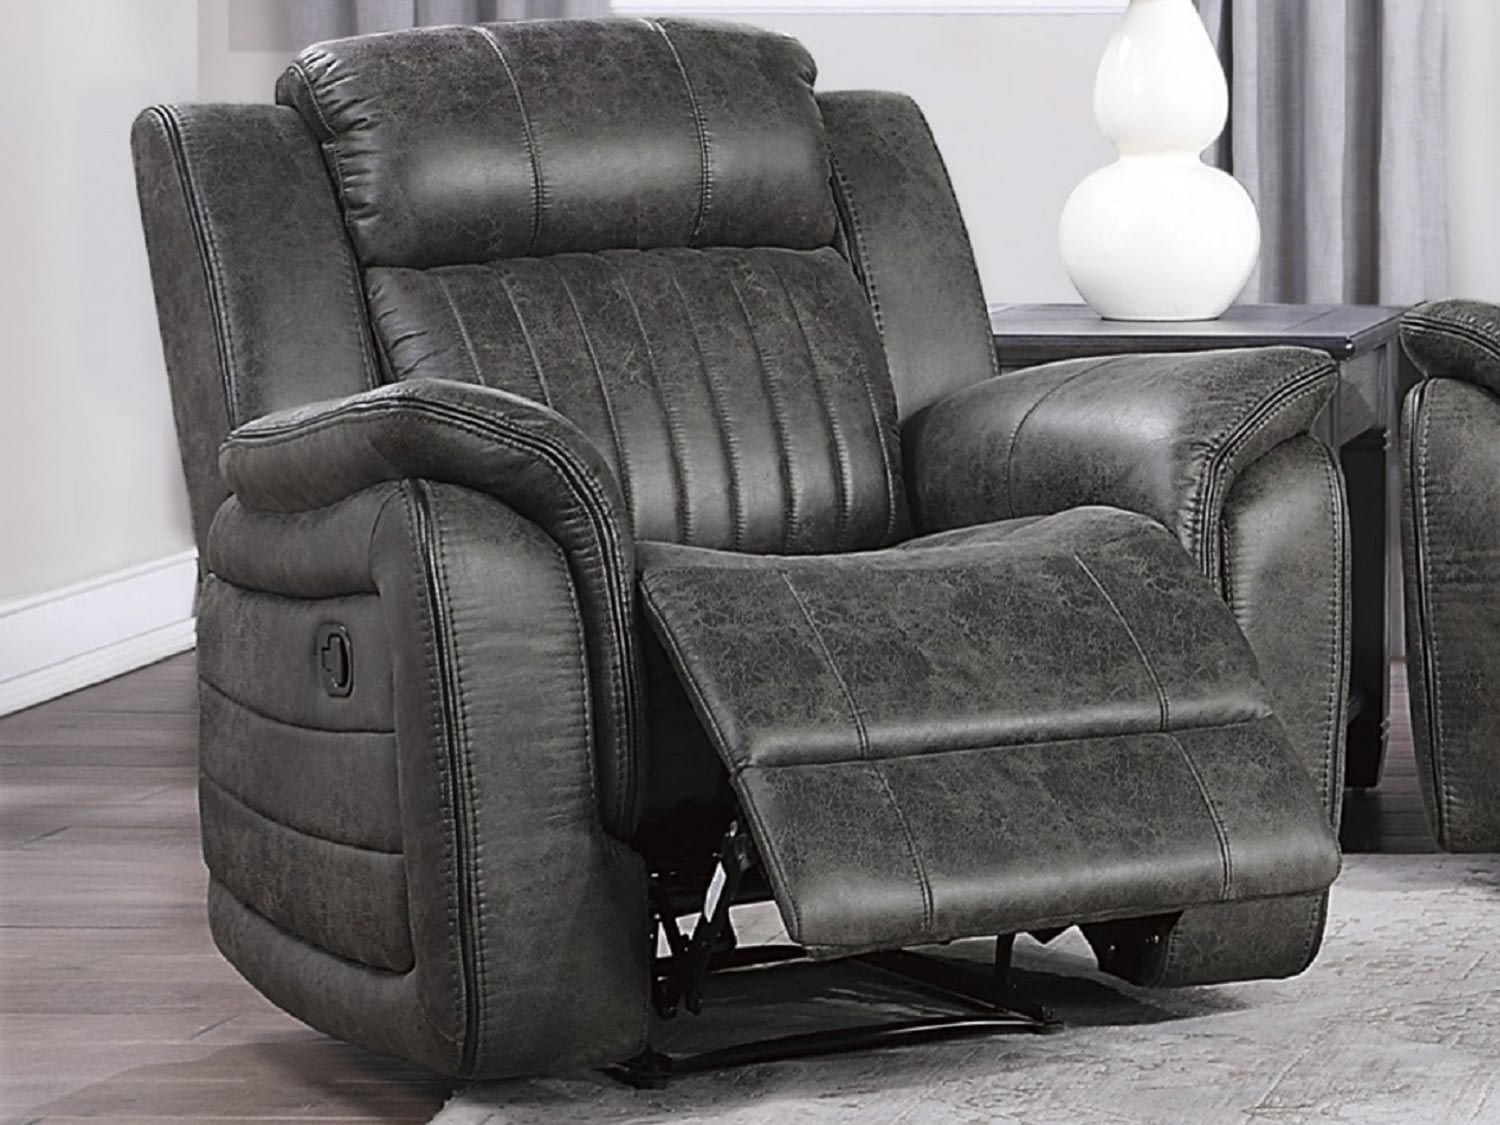 SONORA Recliner Chair